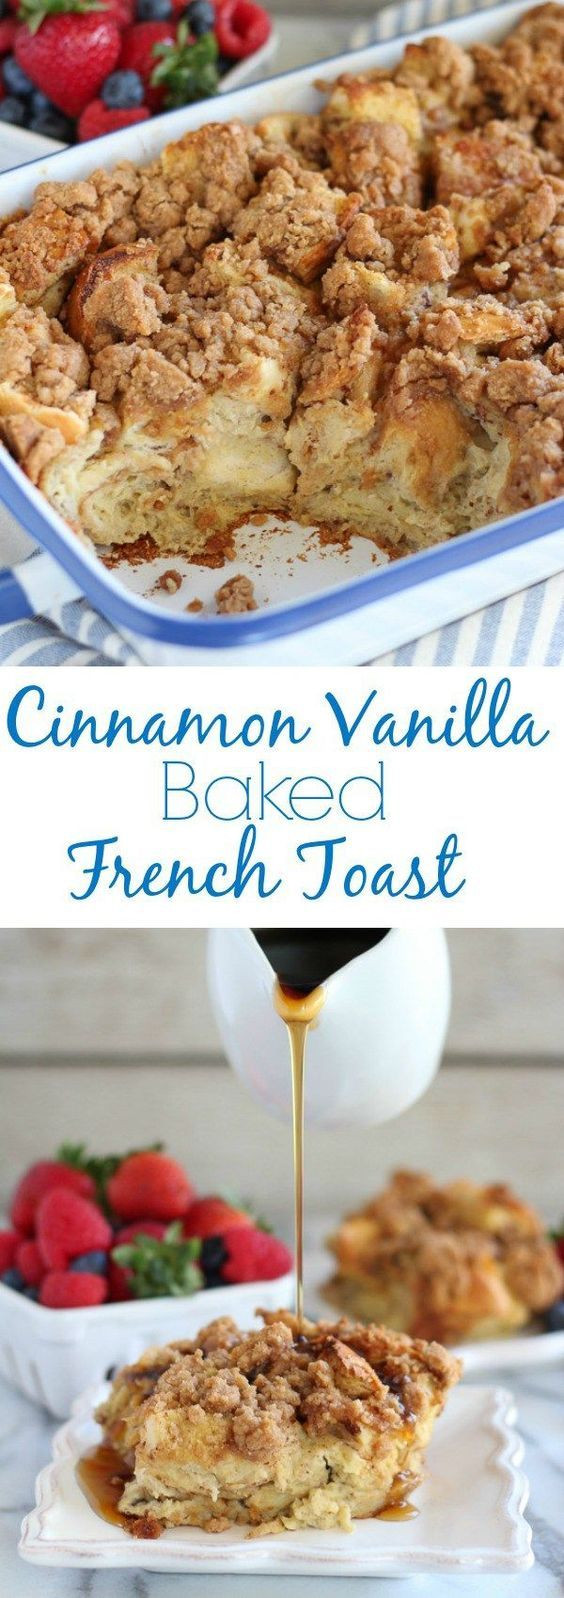 Healthy Baked French Toast
 Best 25 Baked french toast casserole ideas on Pinterest